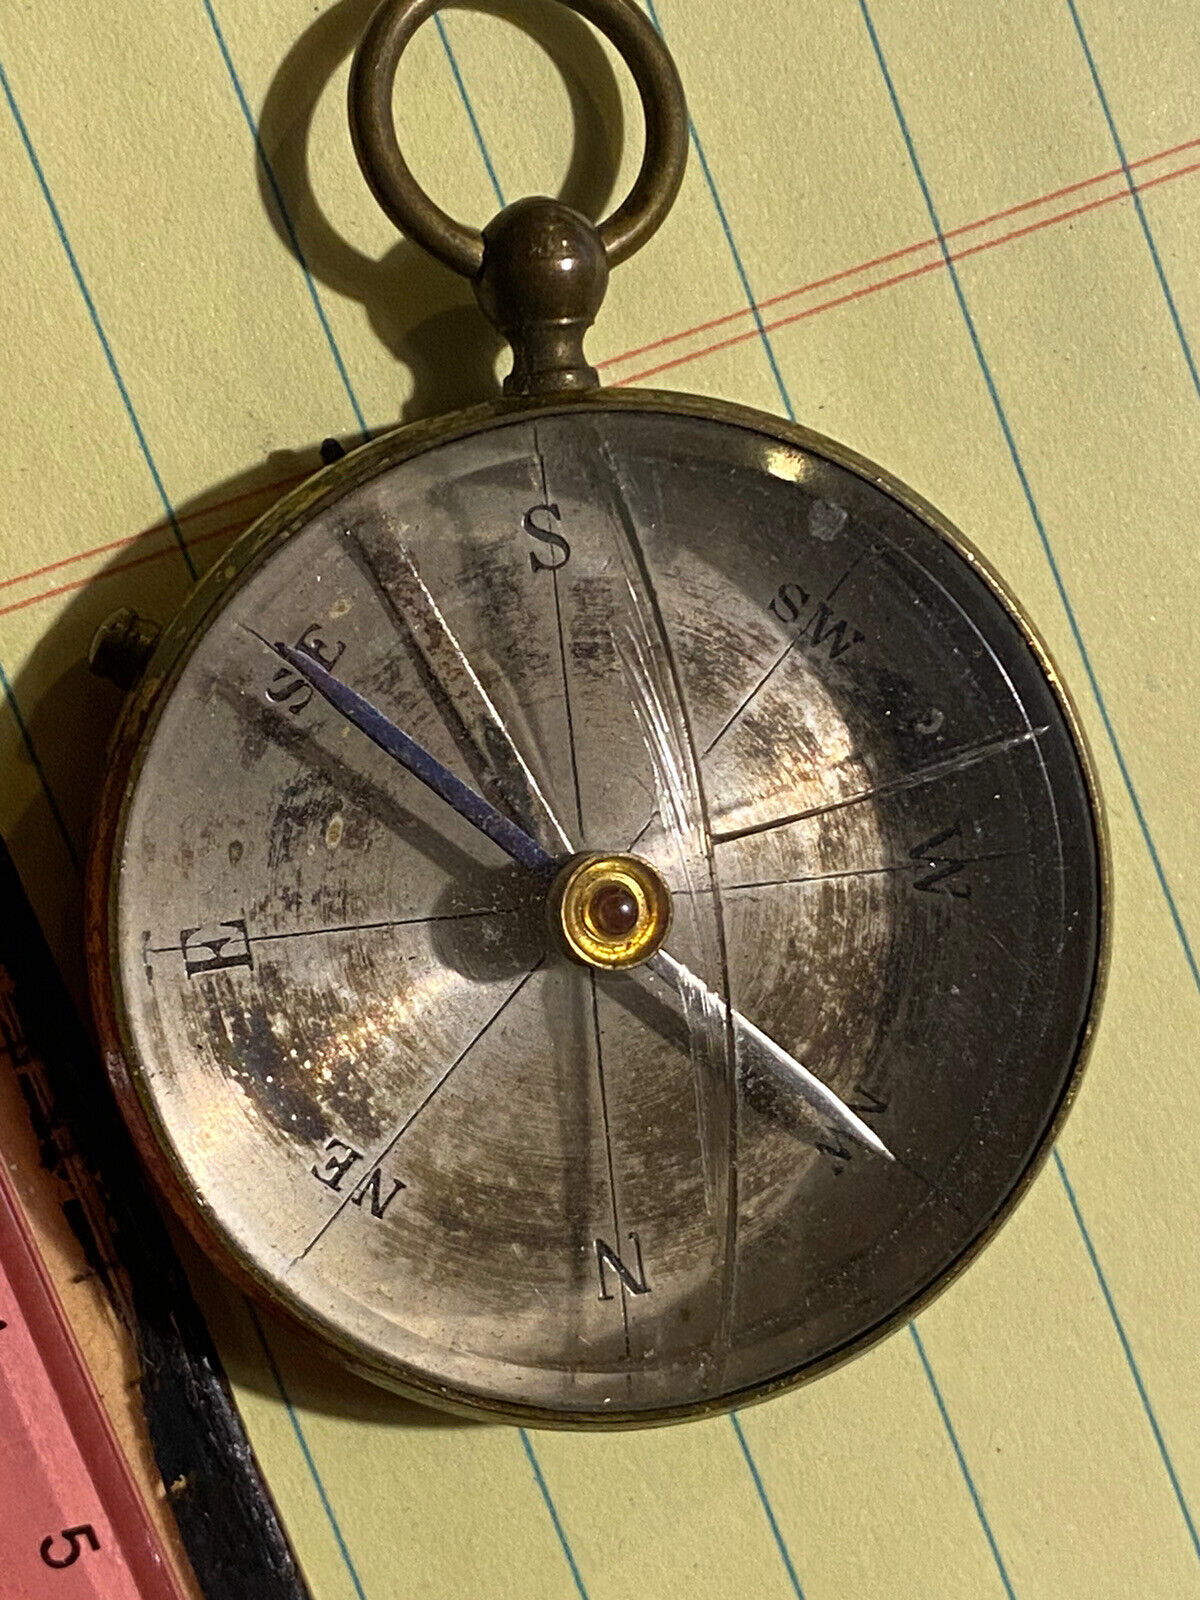 VINTAGE COMPASS - COUNTRY OF ORIGIN UNKNOWN - WITH CRACKED GLASS